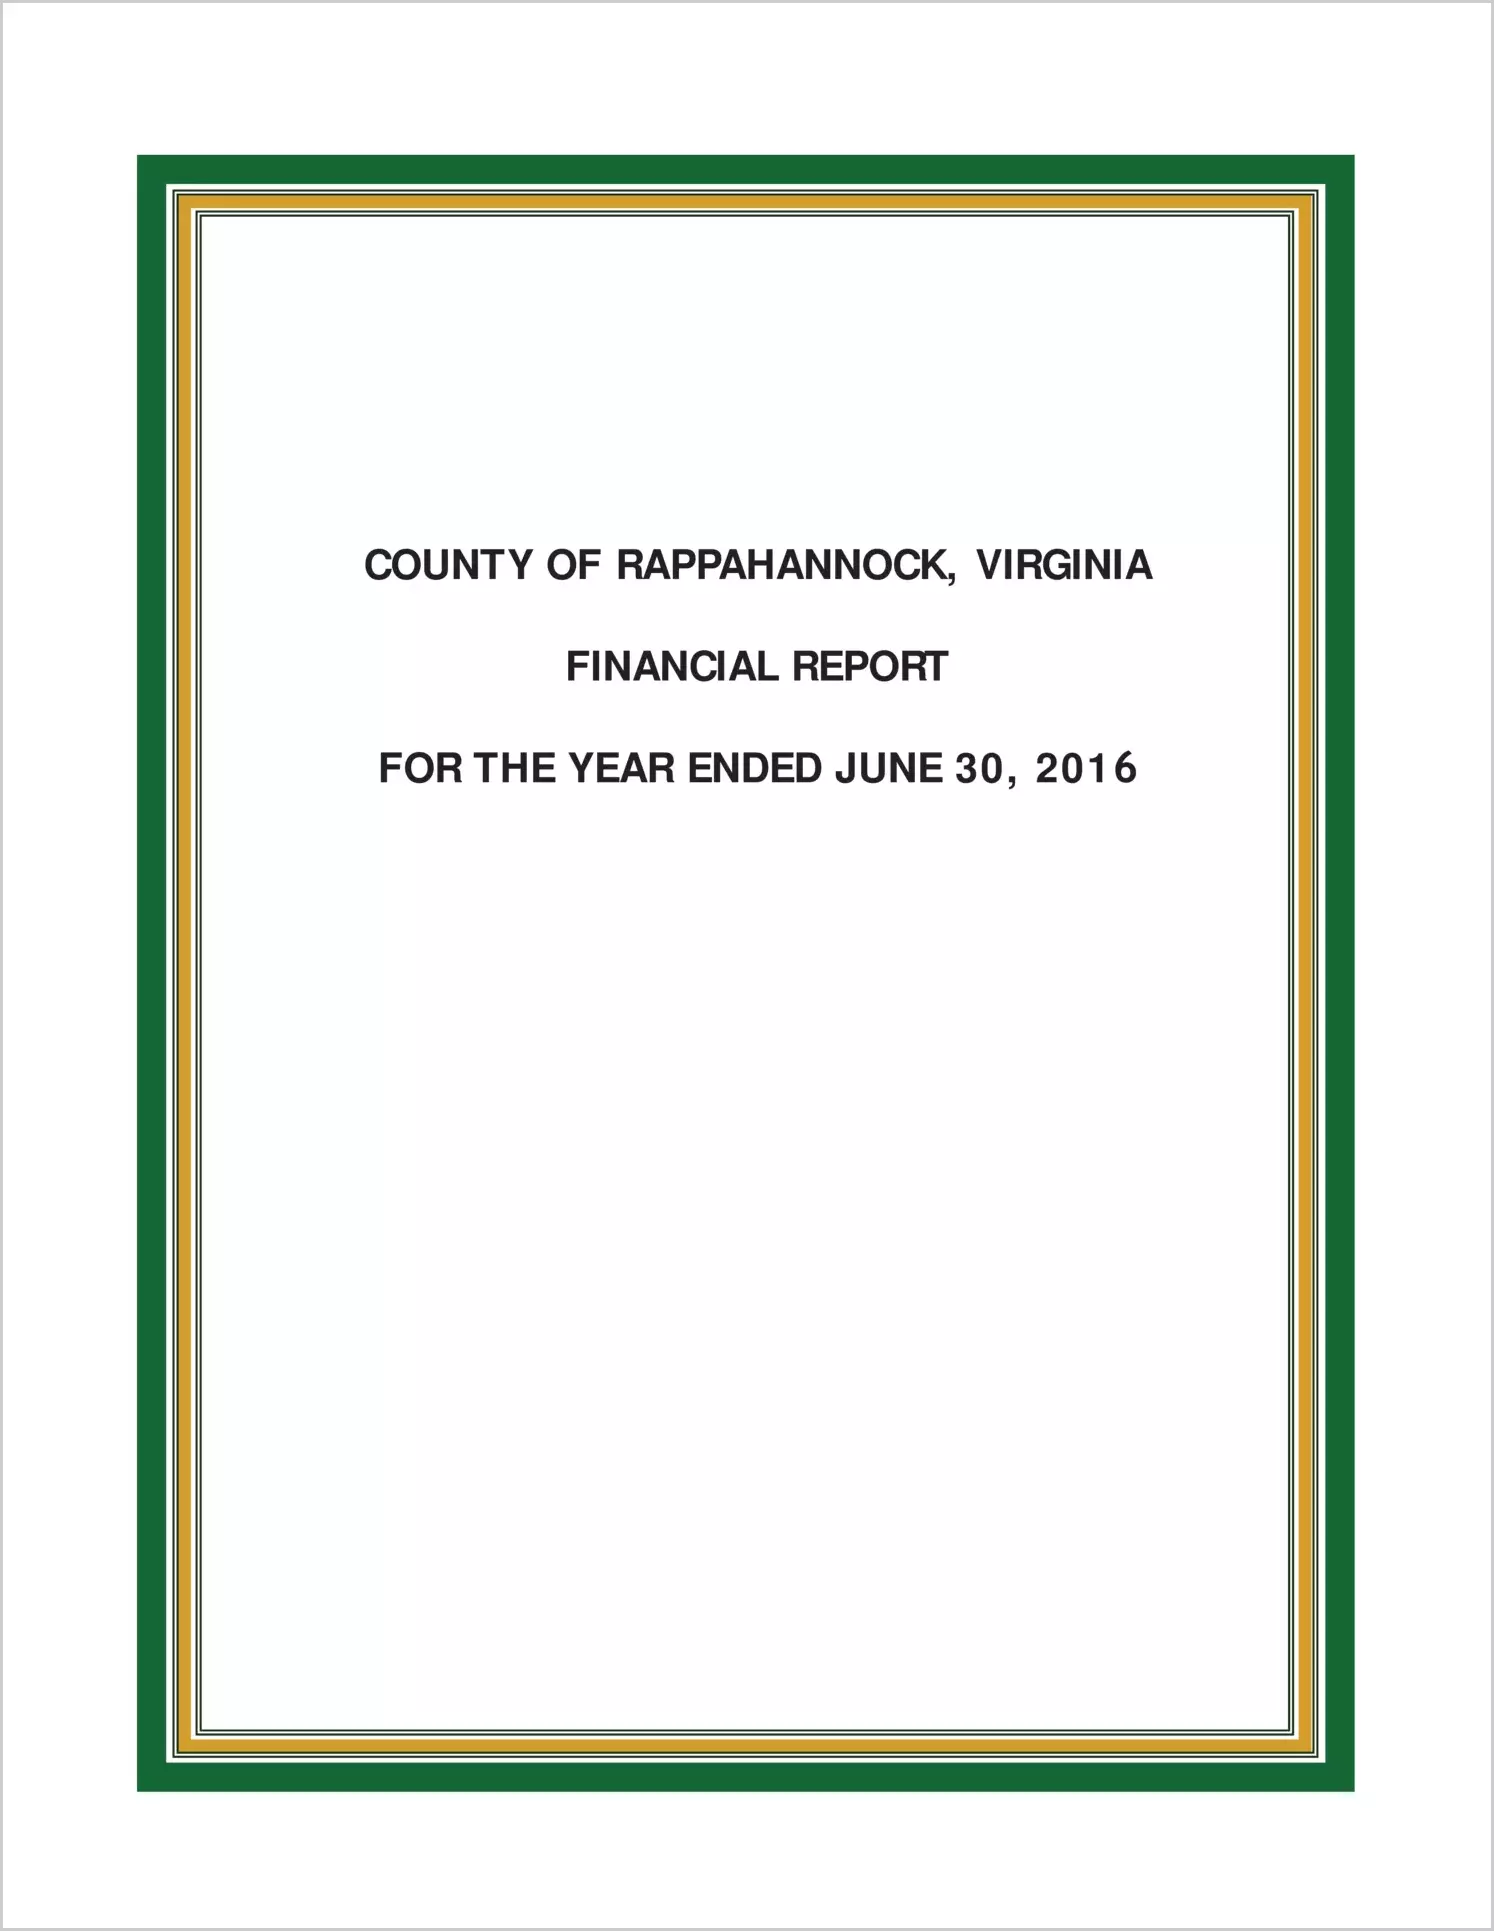 2016 Annual Financial Report for County of Rappahannock